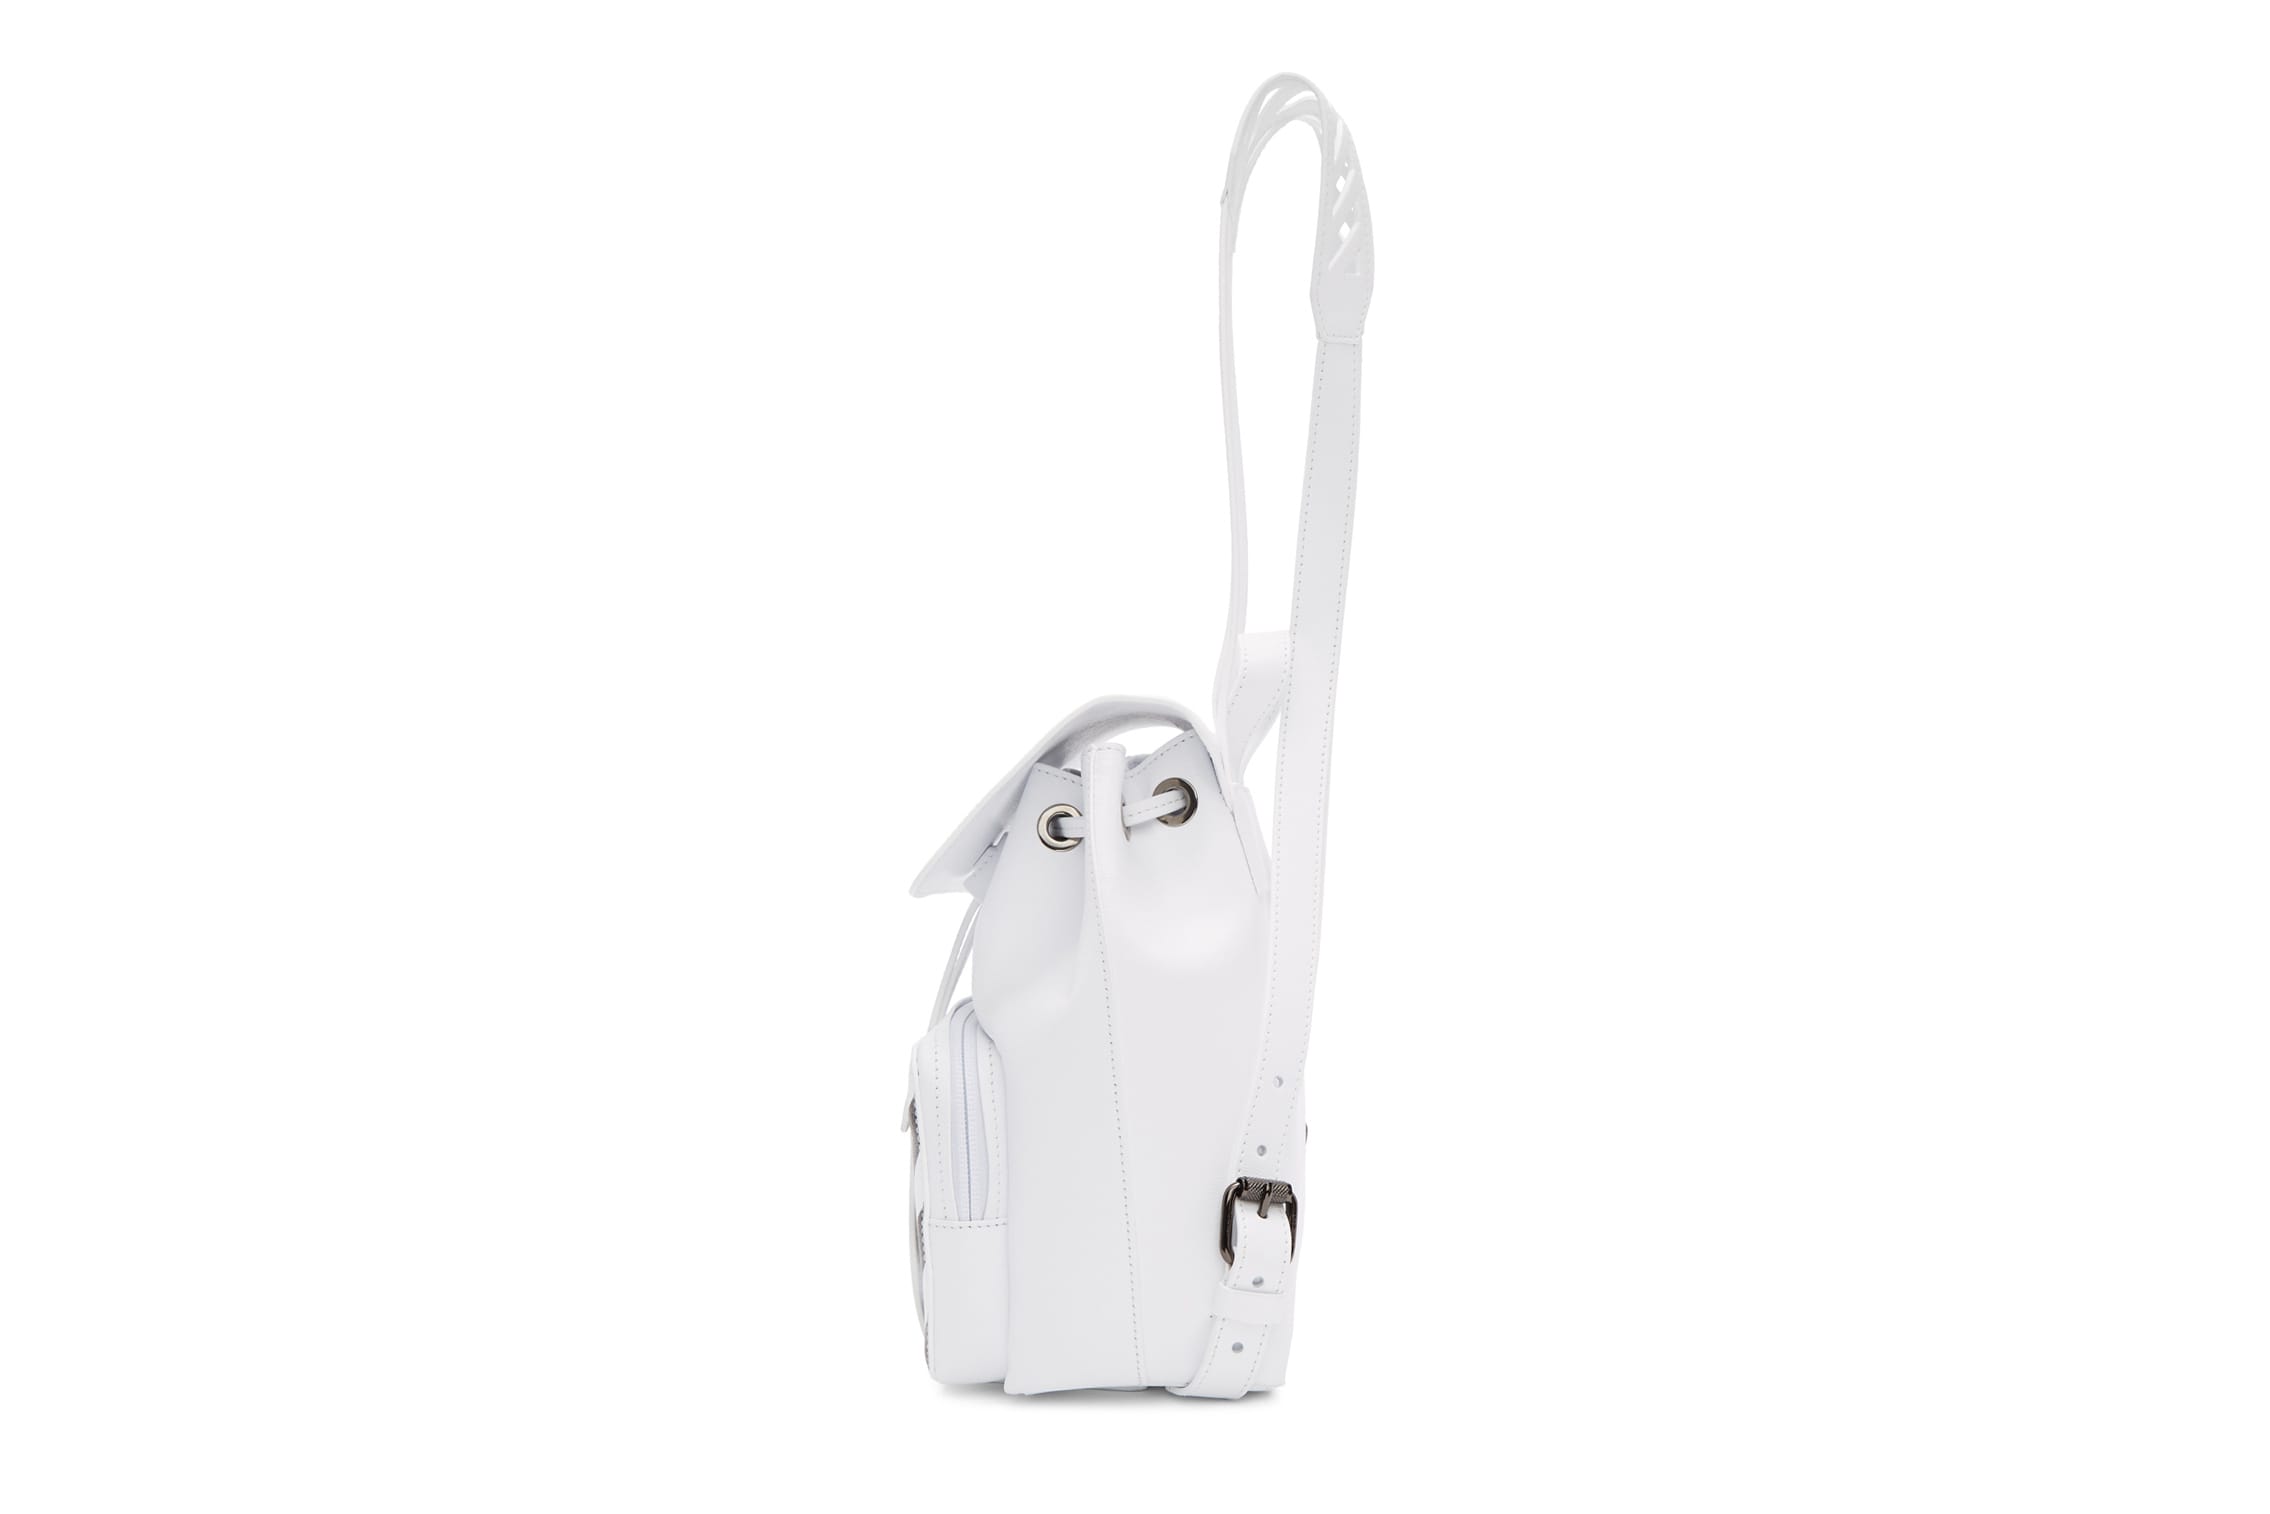 Buy Emprier Mini Backpack for Women Vegan Leather Backpack Purse for Girl  Small Fashion Bag Casual Travel Bag, White, One Size at Amazon.in